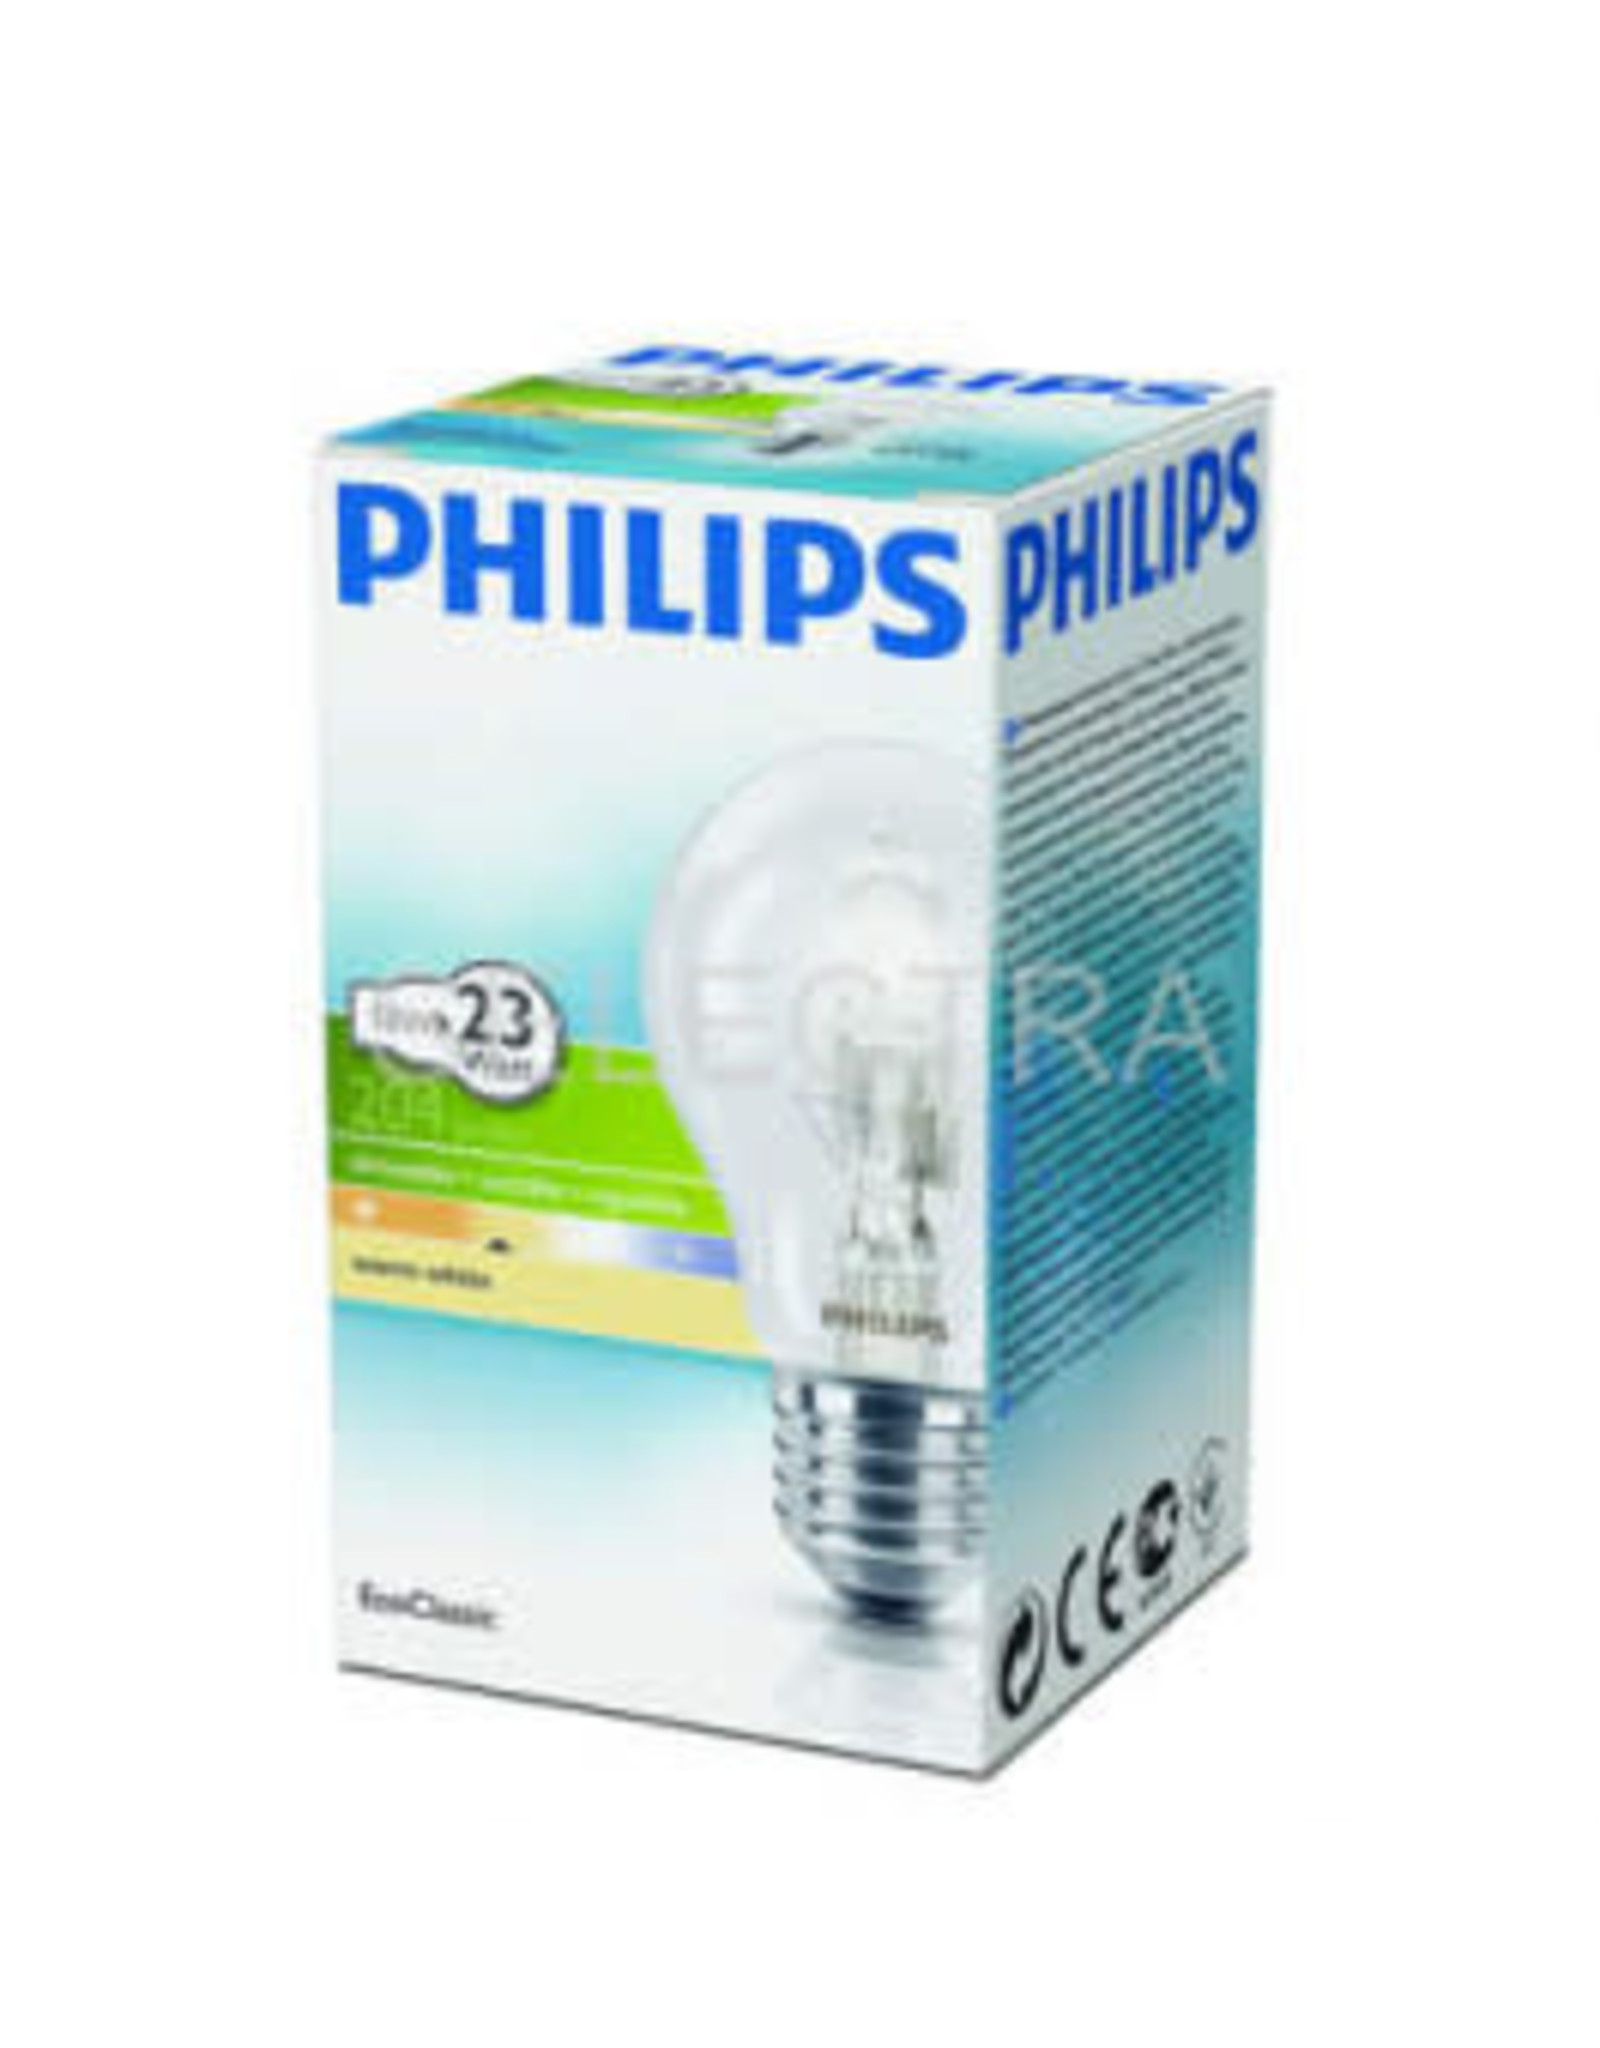 PHILIPS Philips Ecoclassic standard 18W E27 230V A55 CL